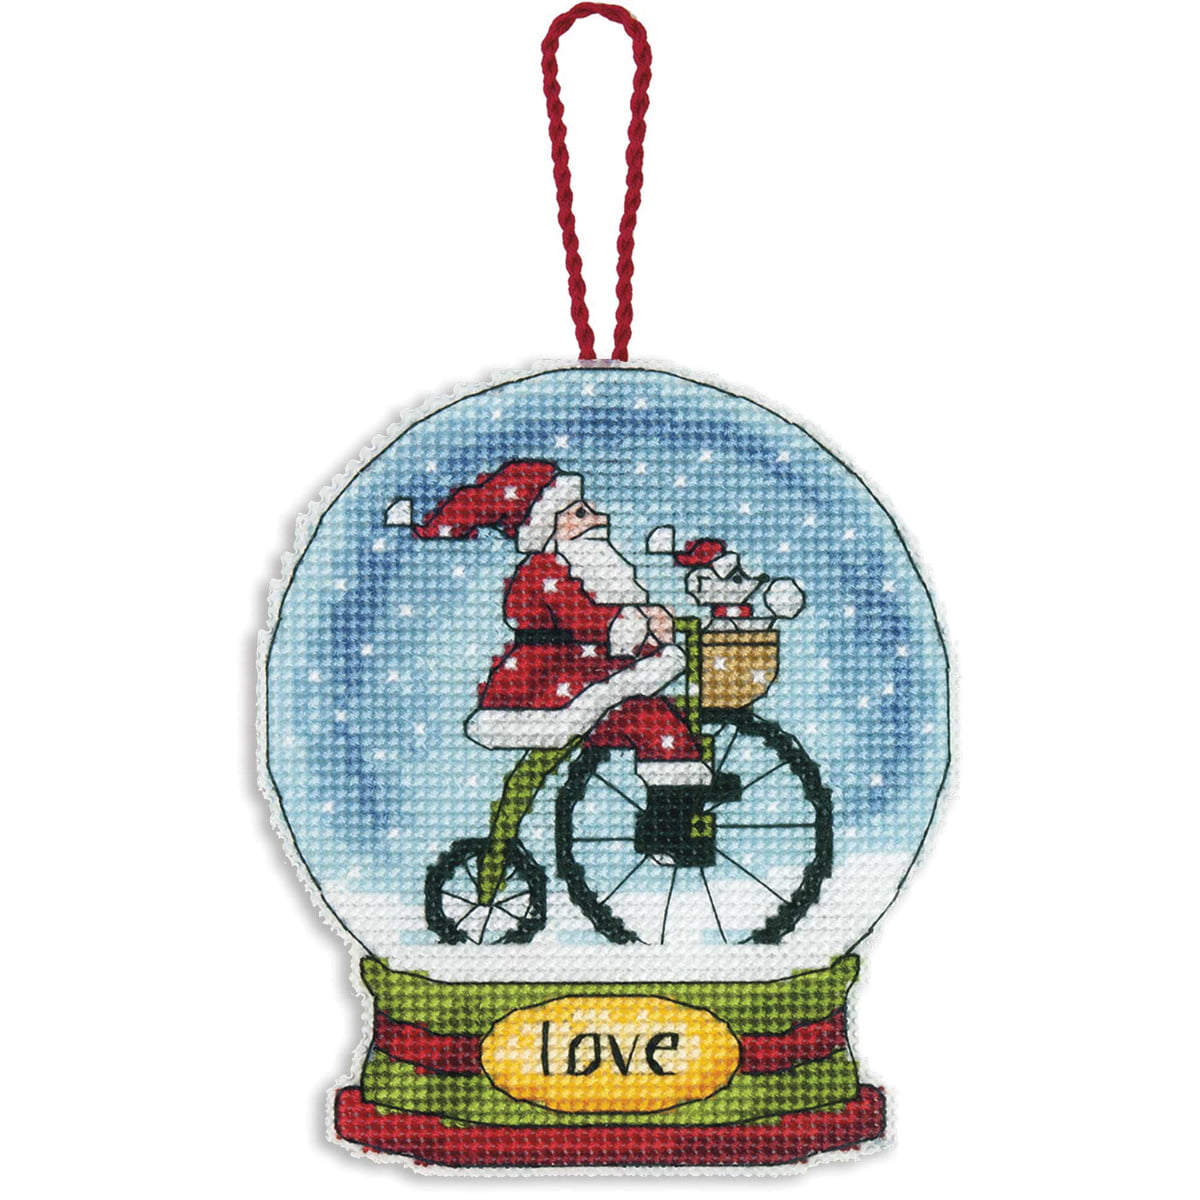 Believe Snowglobe Counted Cross Stitch Kit-3-3/4X4-1/2 14 Count Clear Plastic 